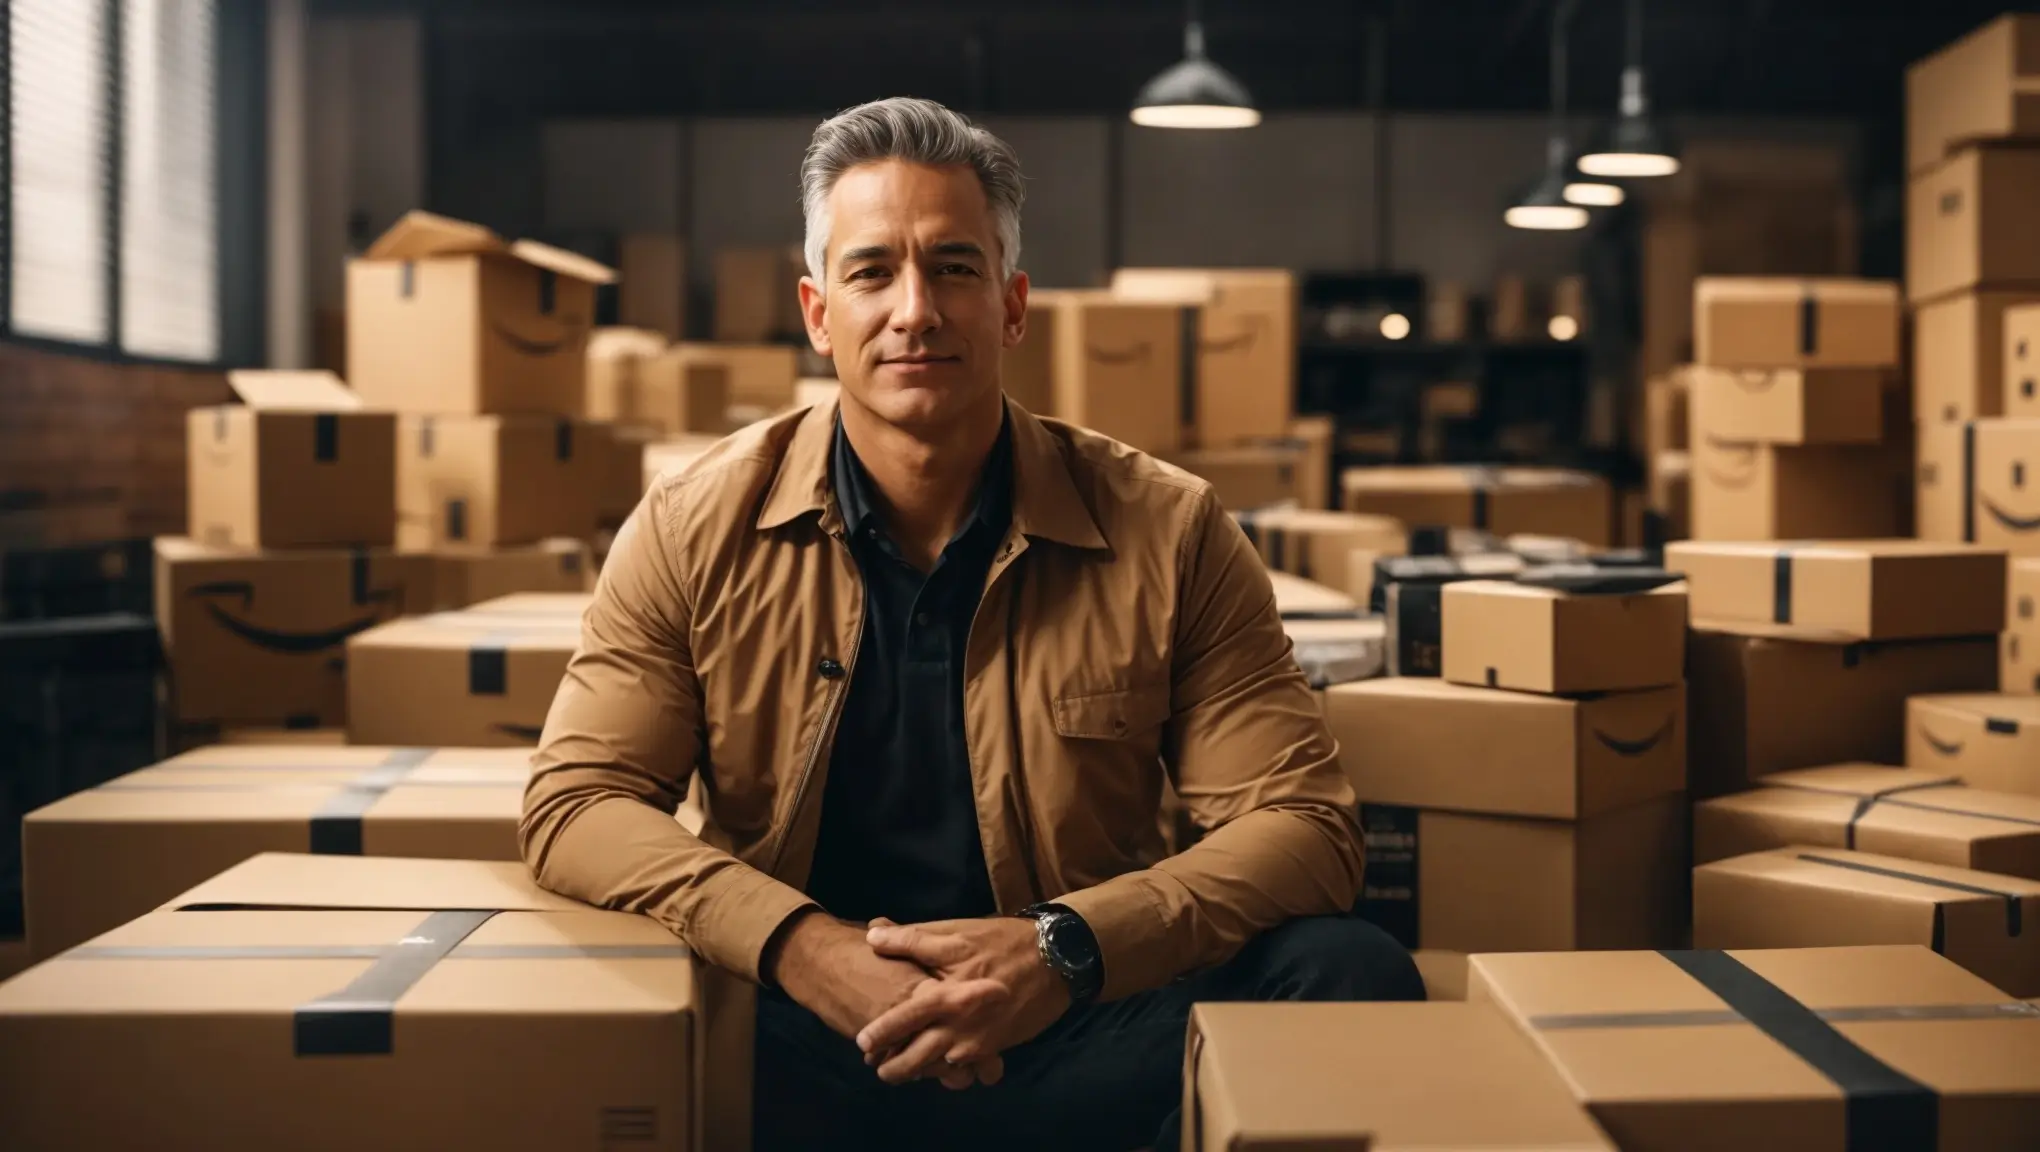 An image of an Amazon business owner sitting next to numerous shipping boxes.